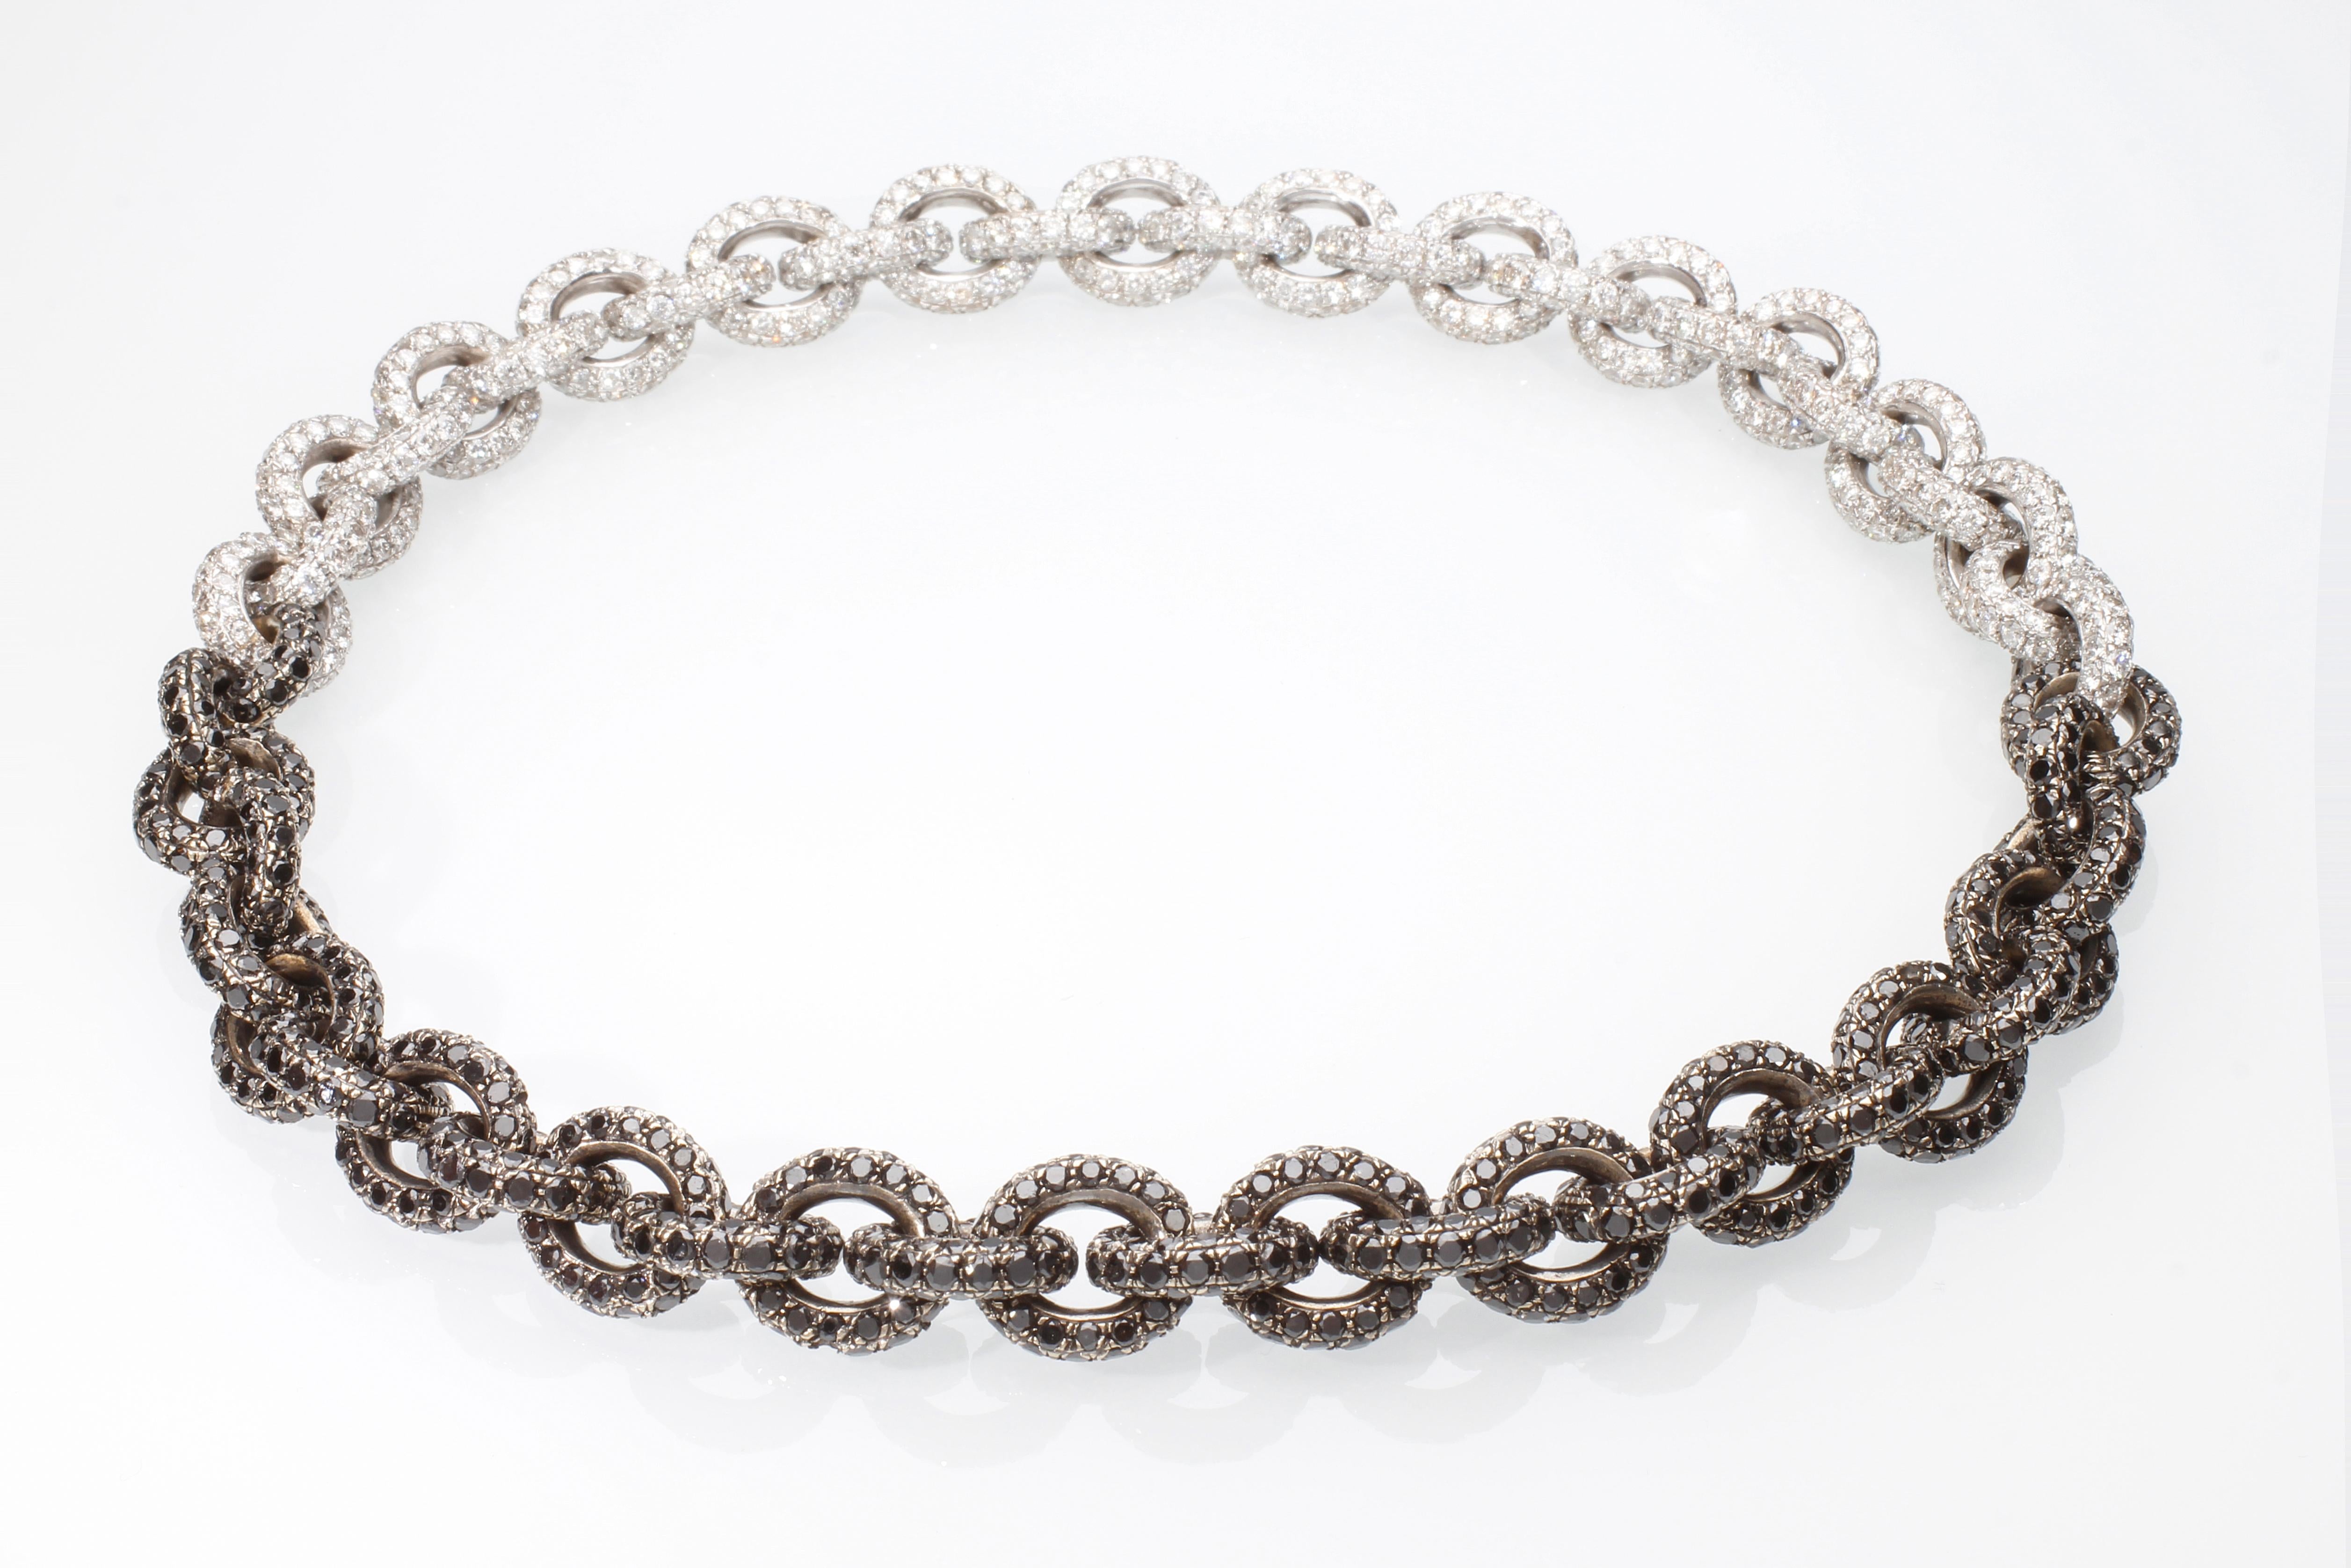 Chain Bracelet with 30.76 Ct of White Diamonds. Handmade. Made in Italy For Sale 7